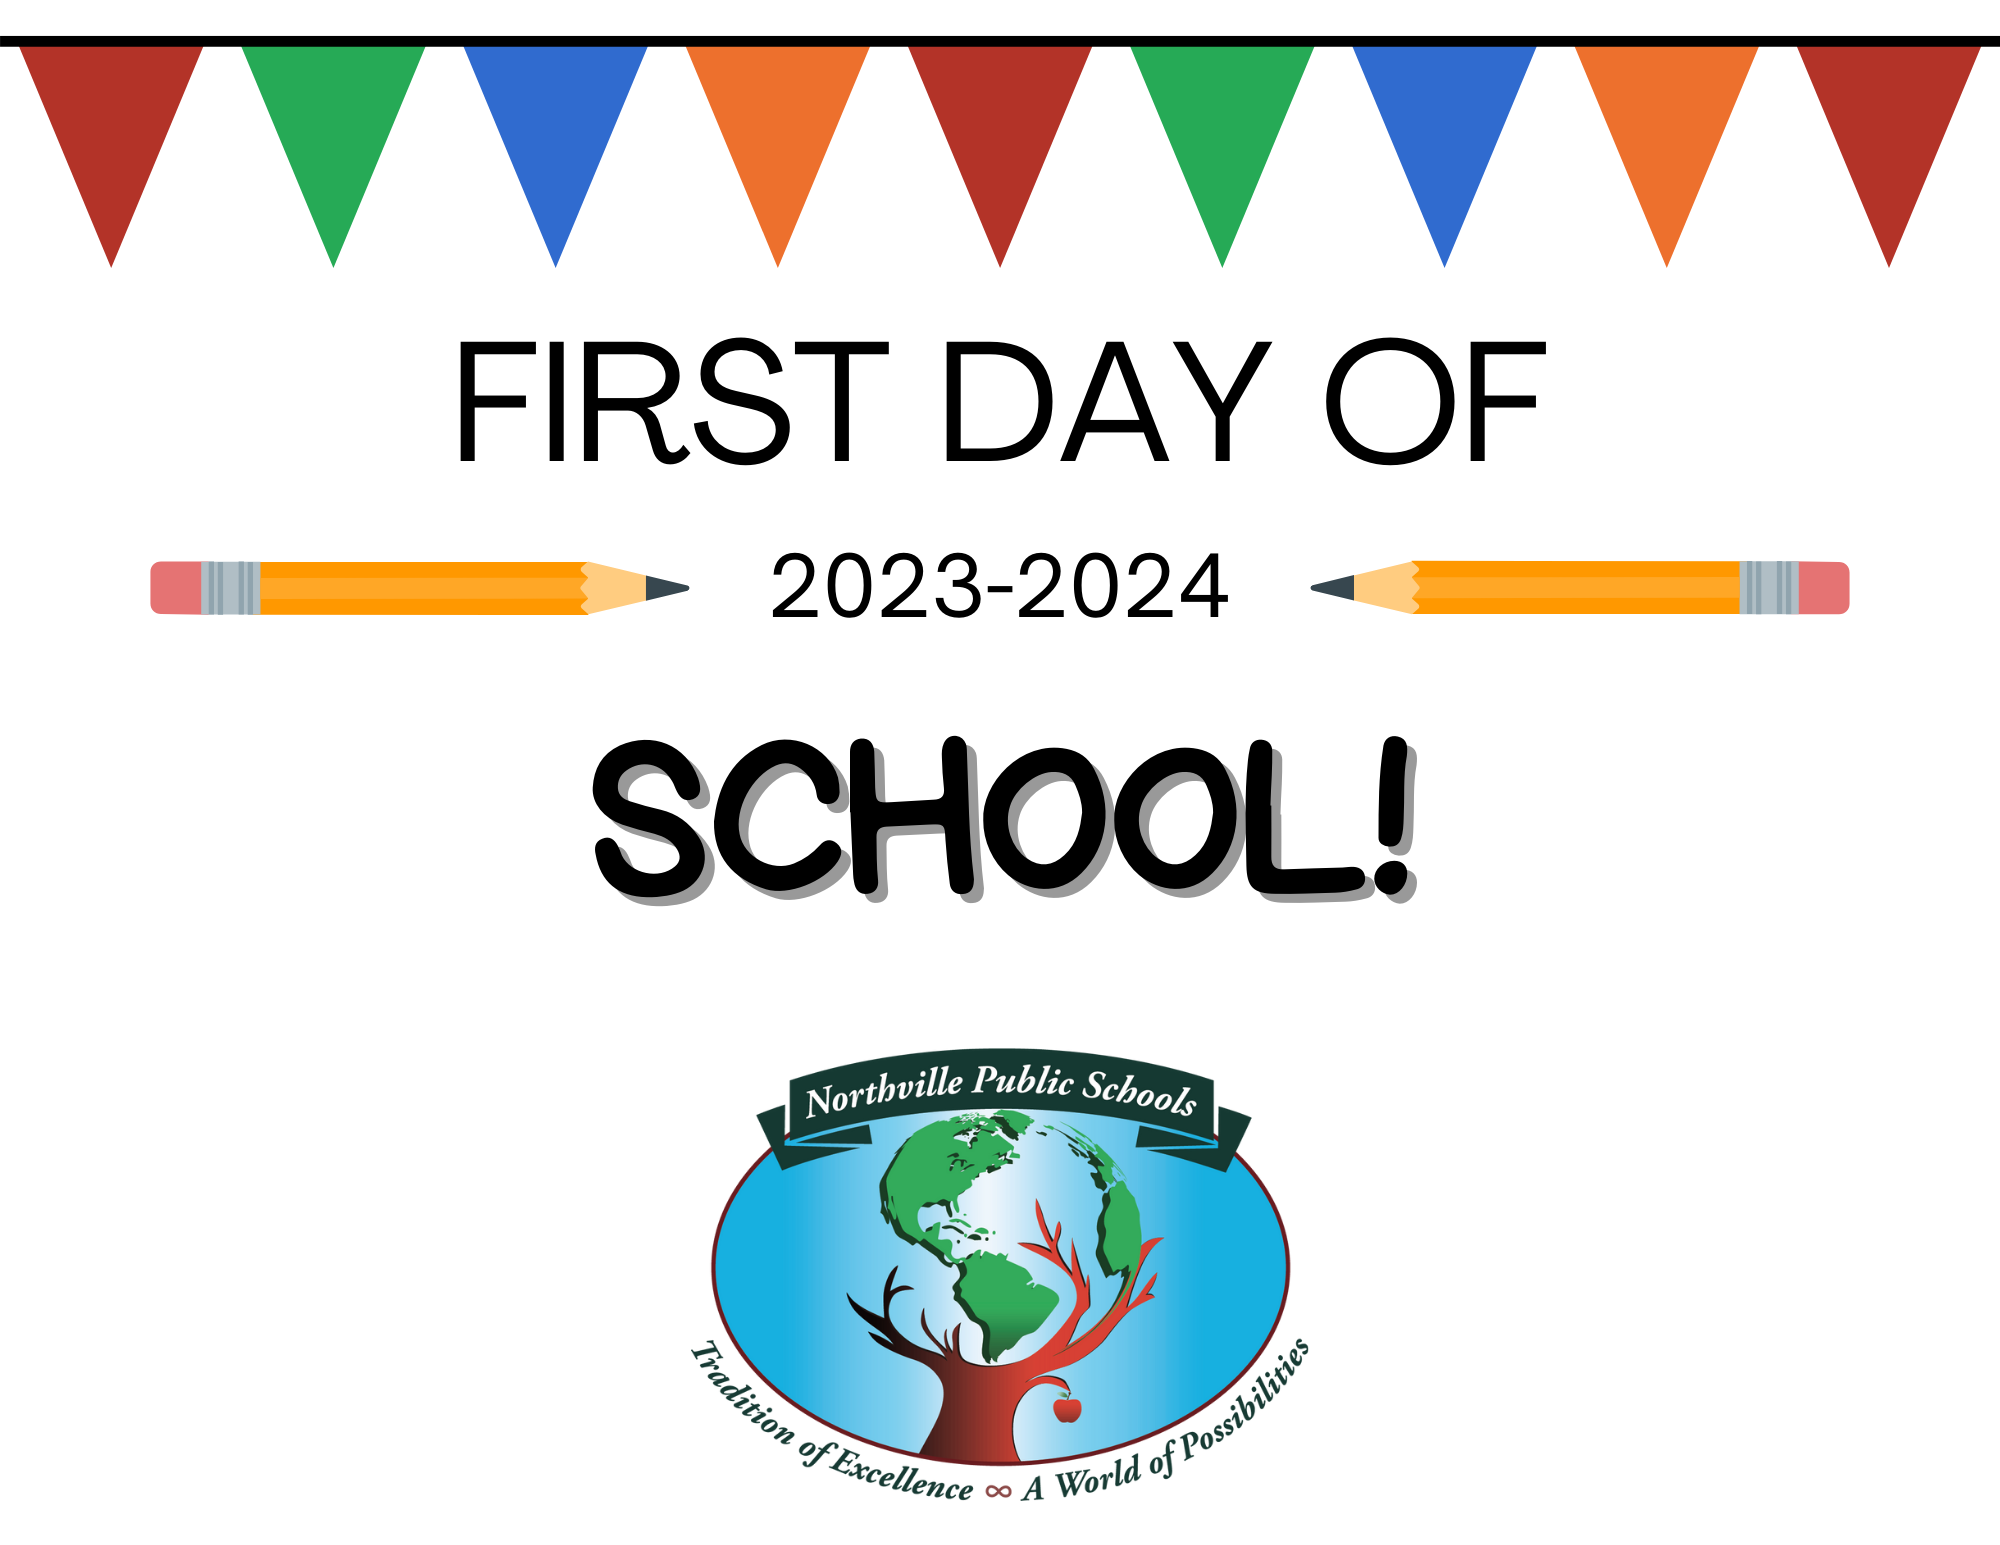 First Day of School sign album 2023/24